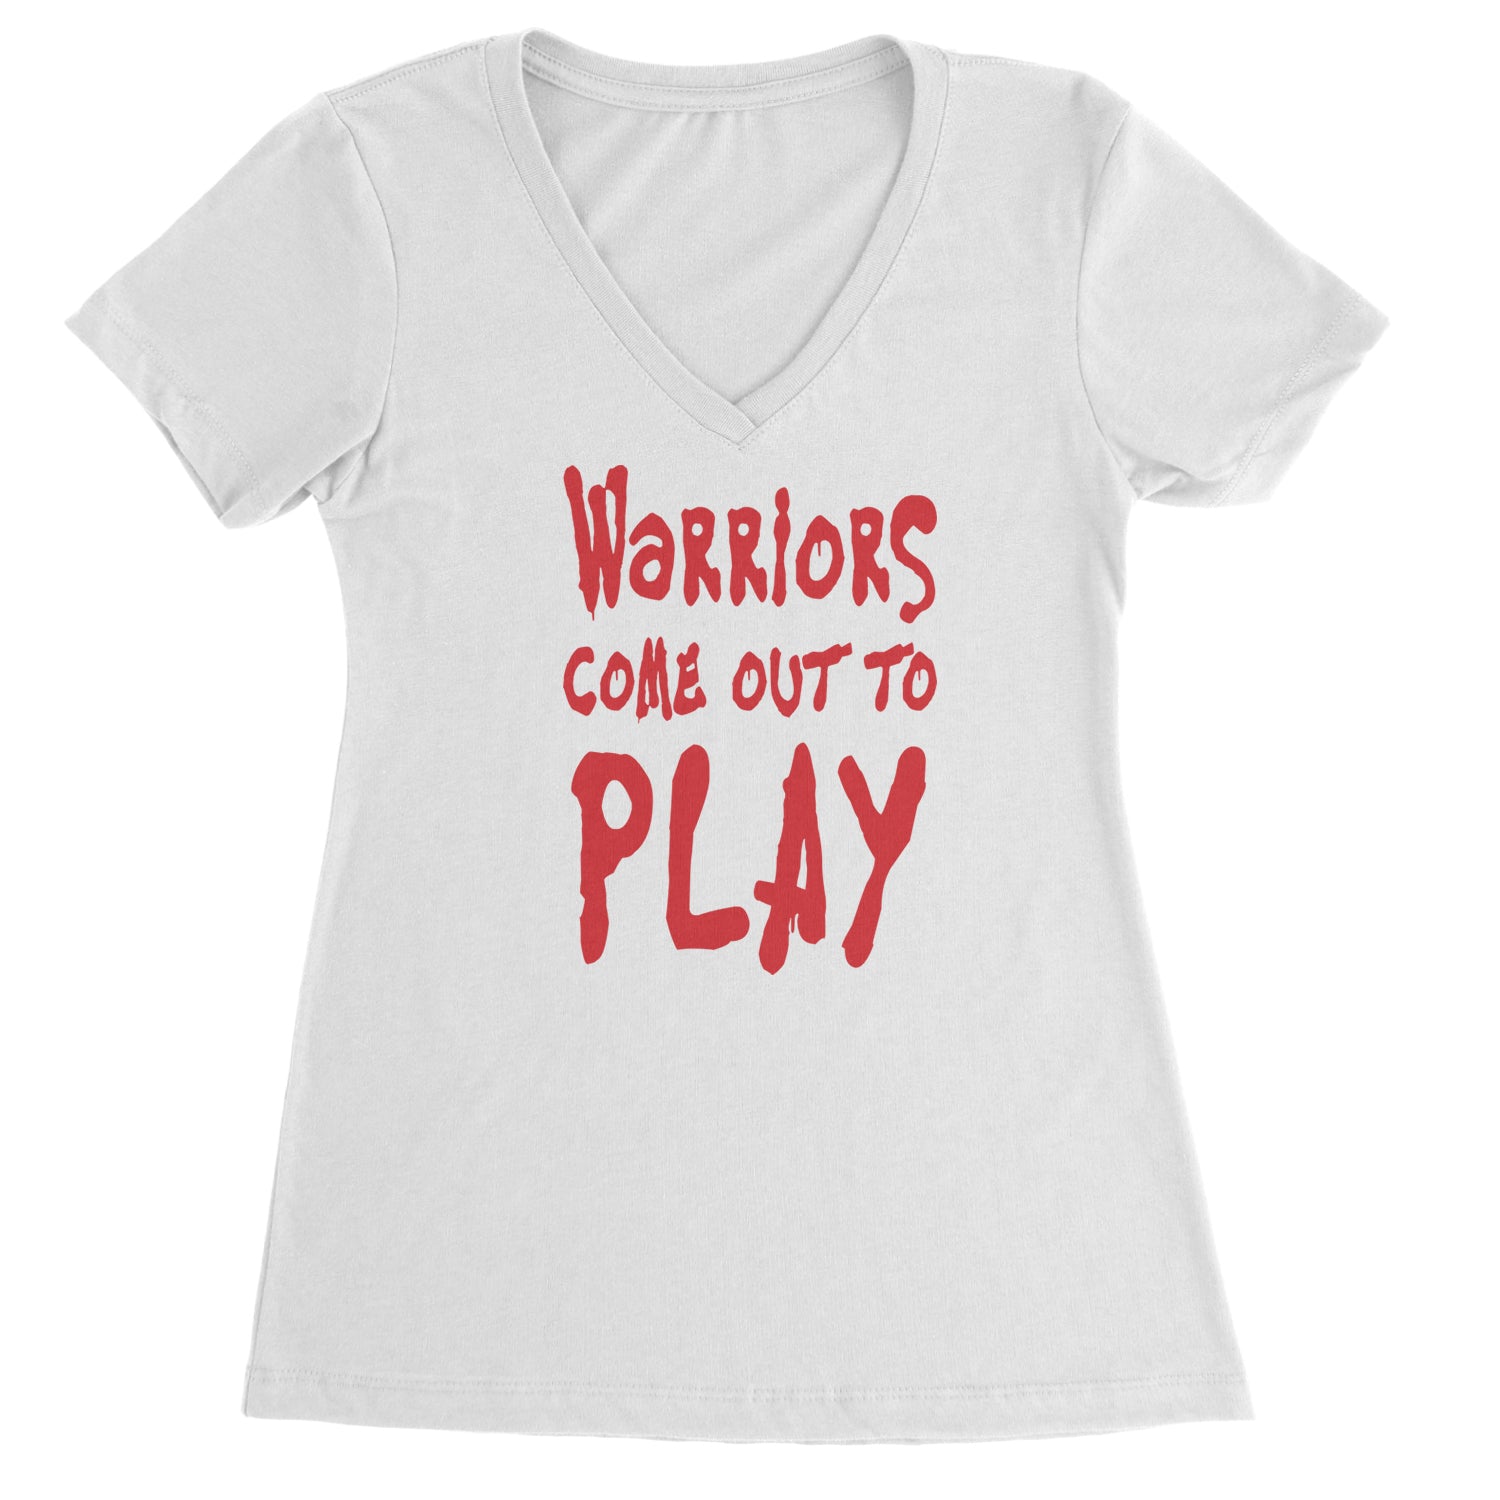 Warriors Come Out To Play  Ladies V-Neck T-shirt Black